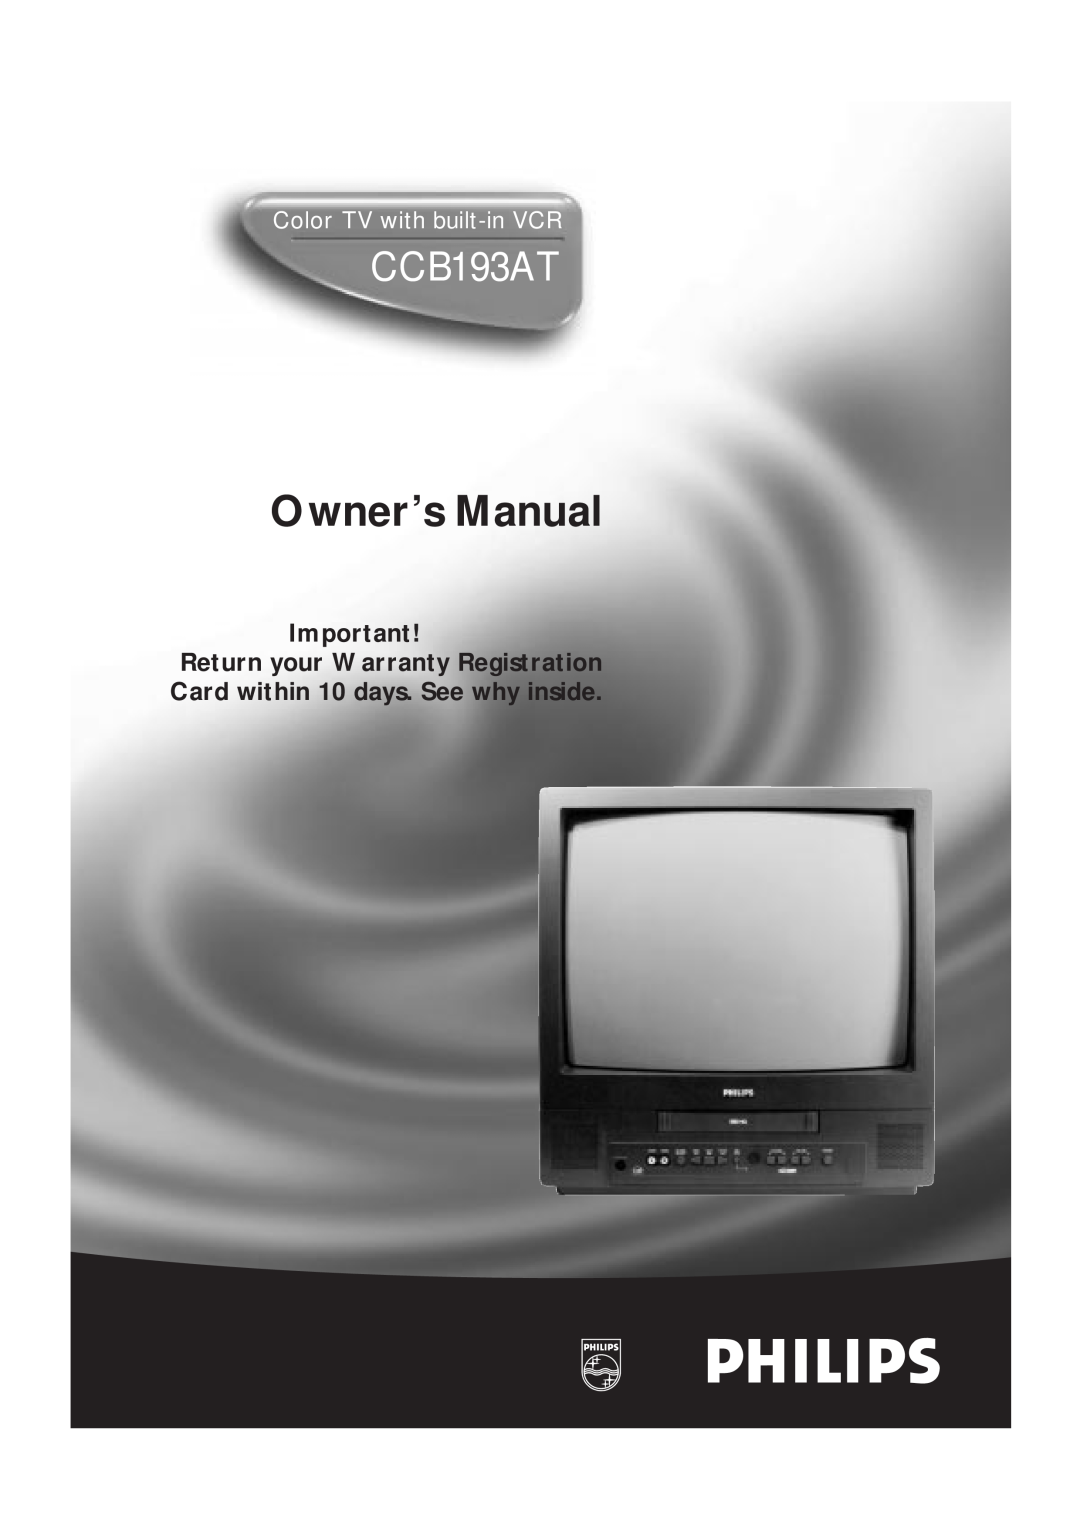 Magnavox CCB193AT owner manual Owner’s Manual, Color TV with built-in VCR 